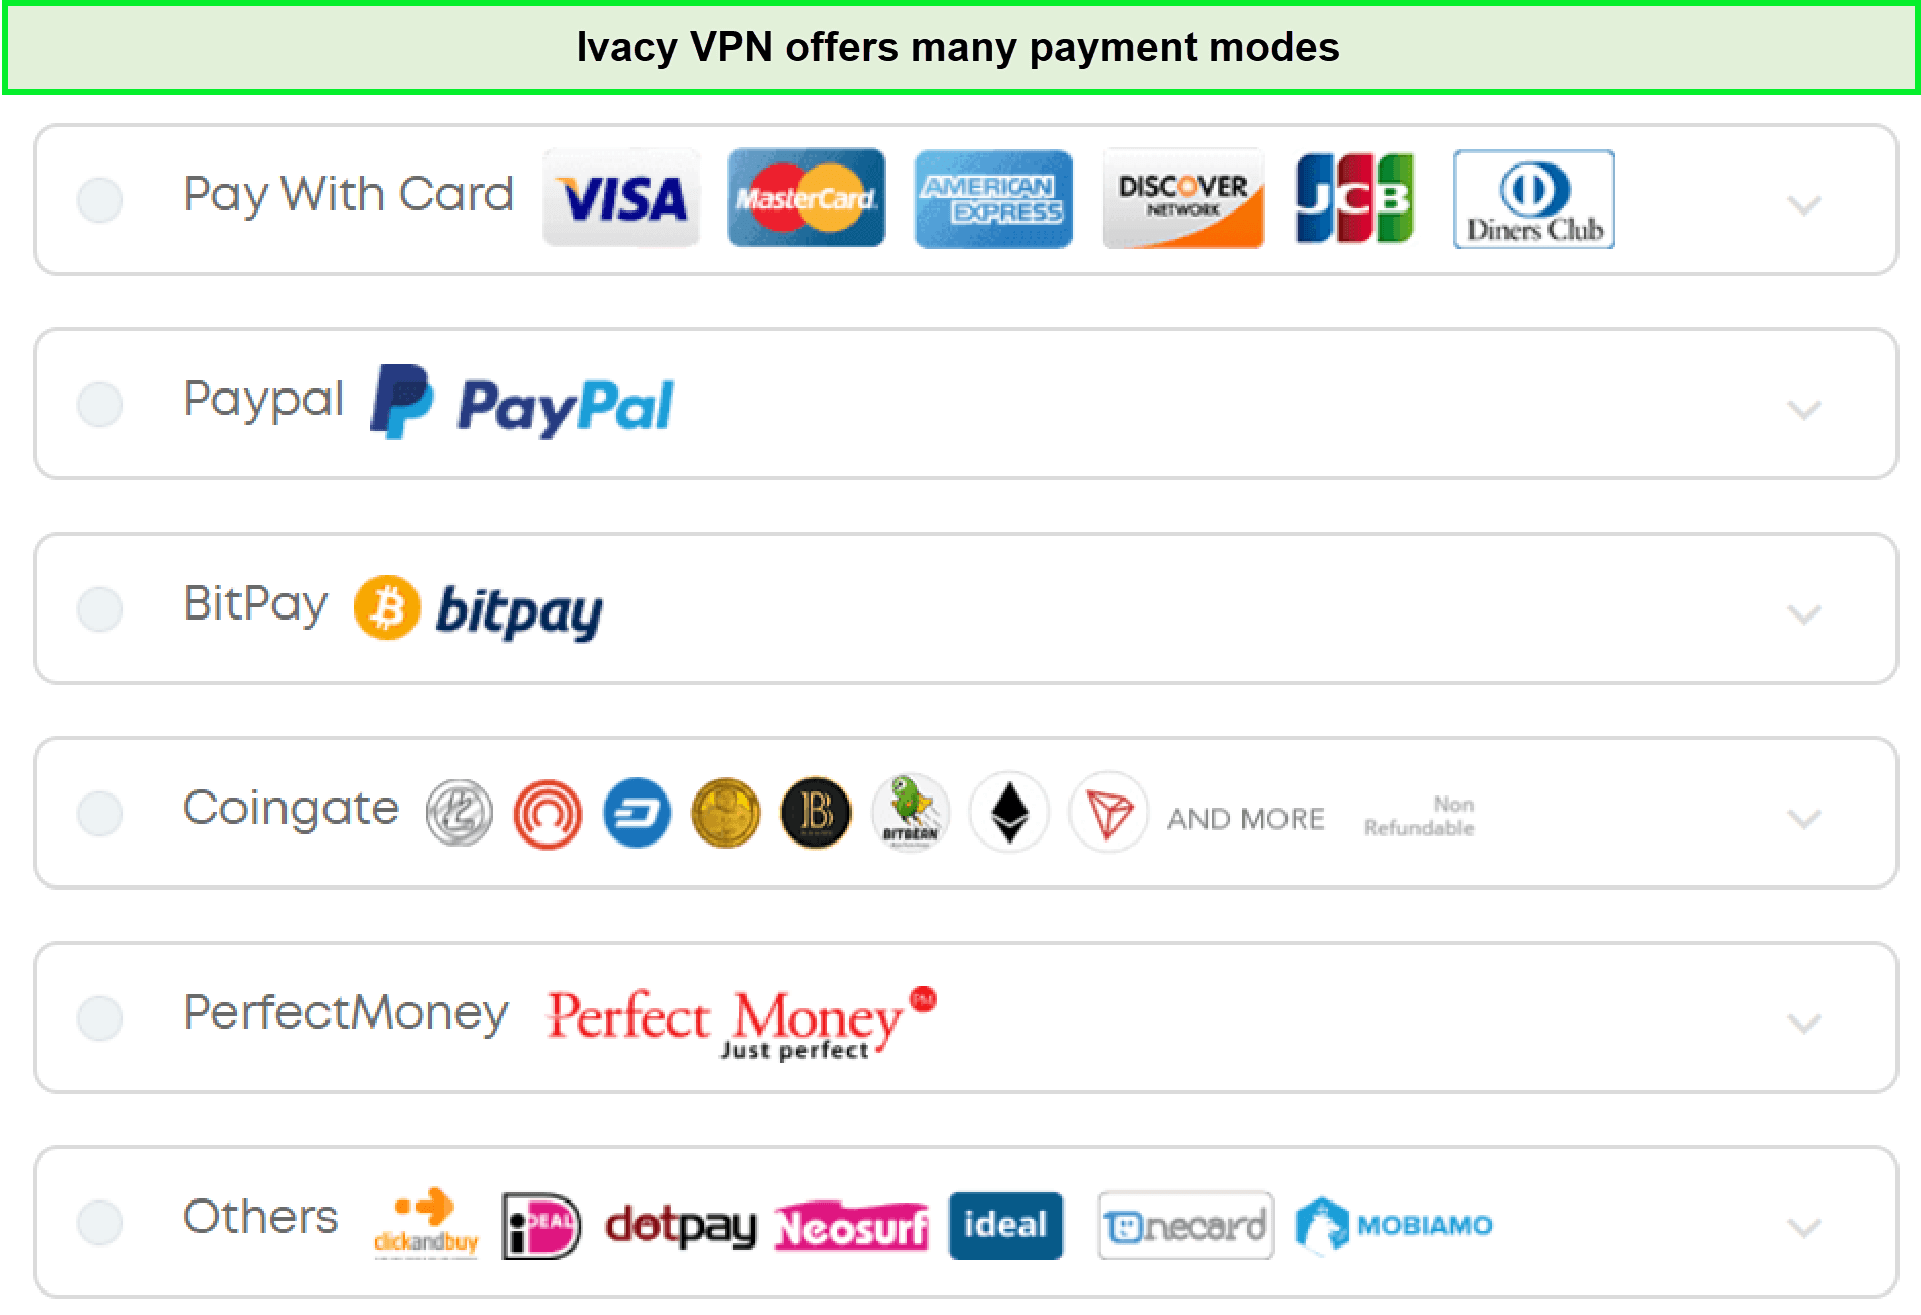 ivacy-payment-modes-in-Germany